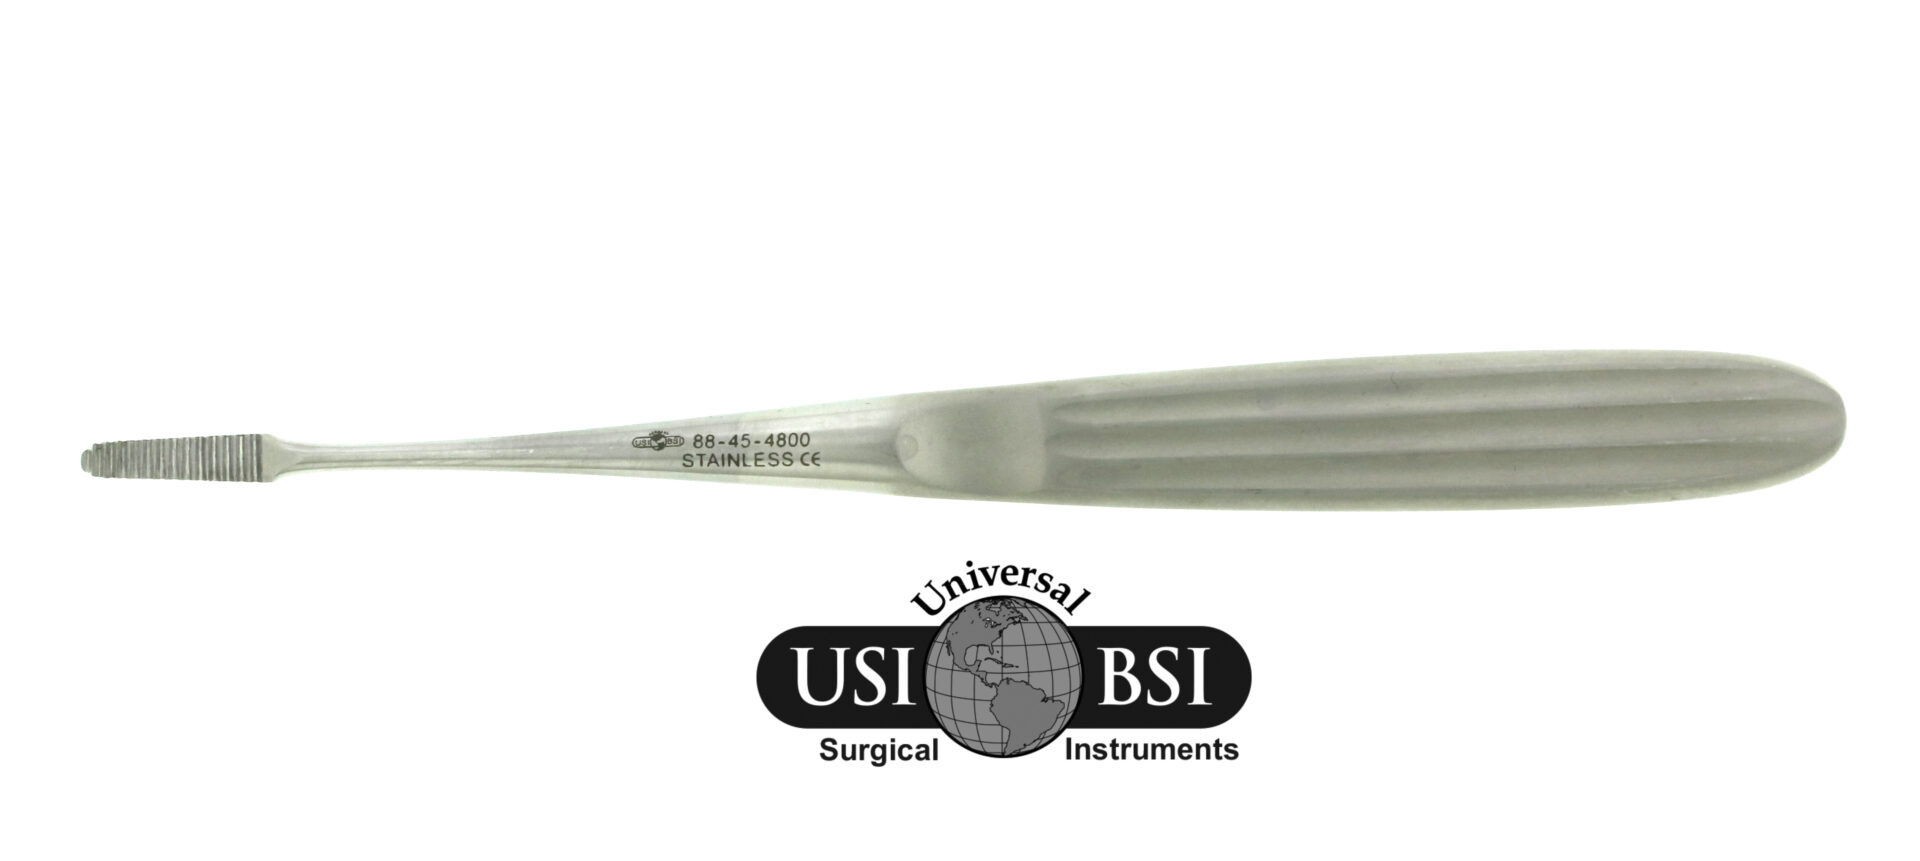 A close up of the logo for universal surgical instruments